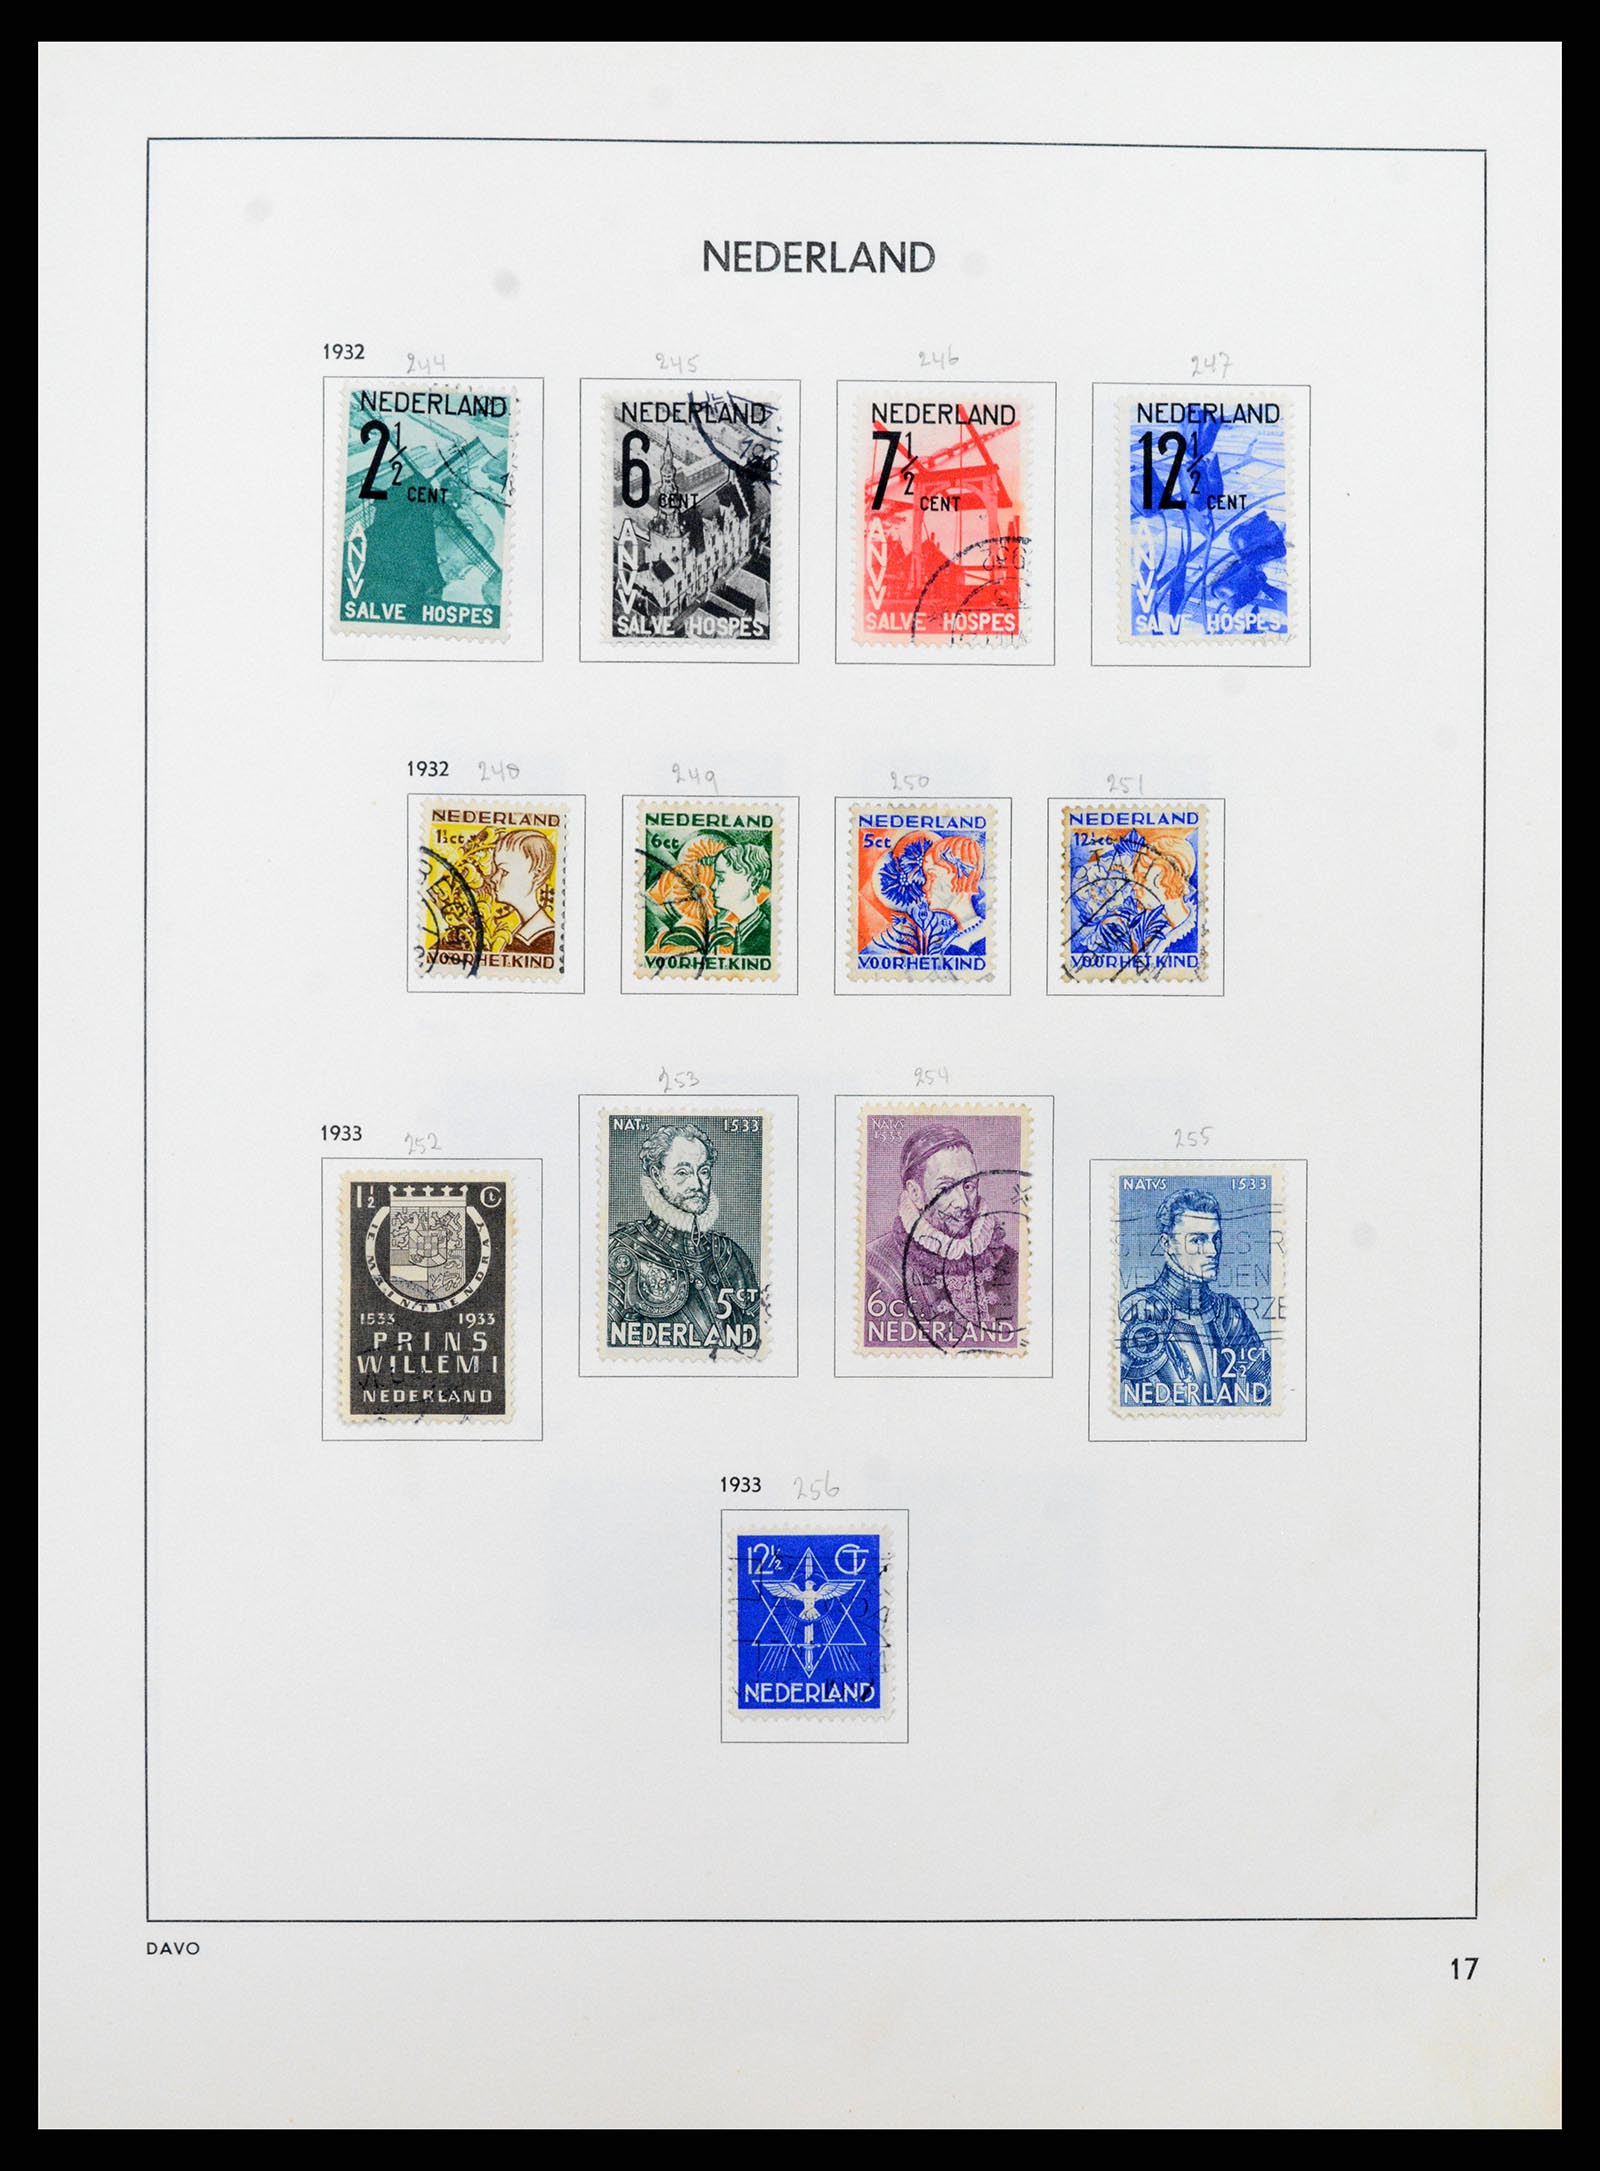 37346 017 - Stamp collection 37346 Netherlands 1852-1996.